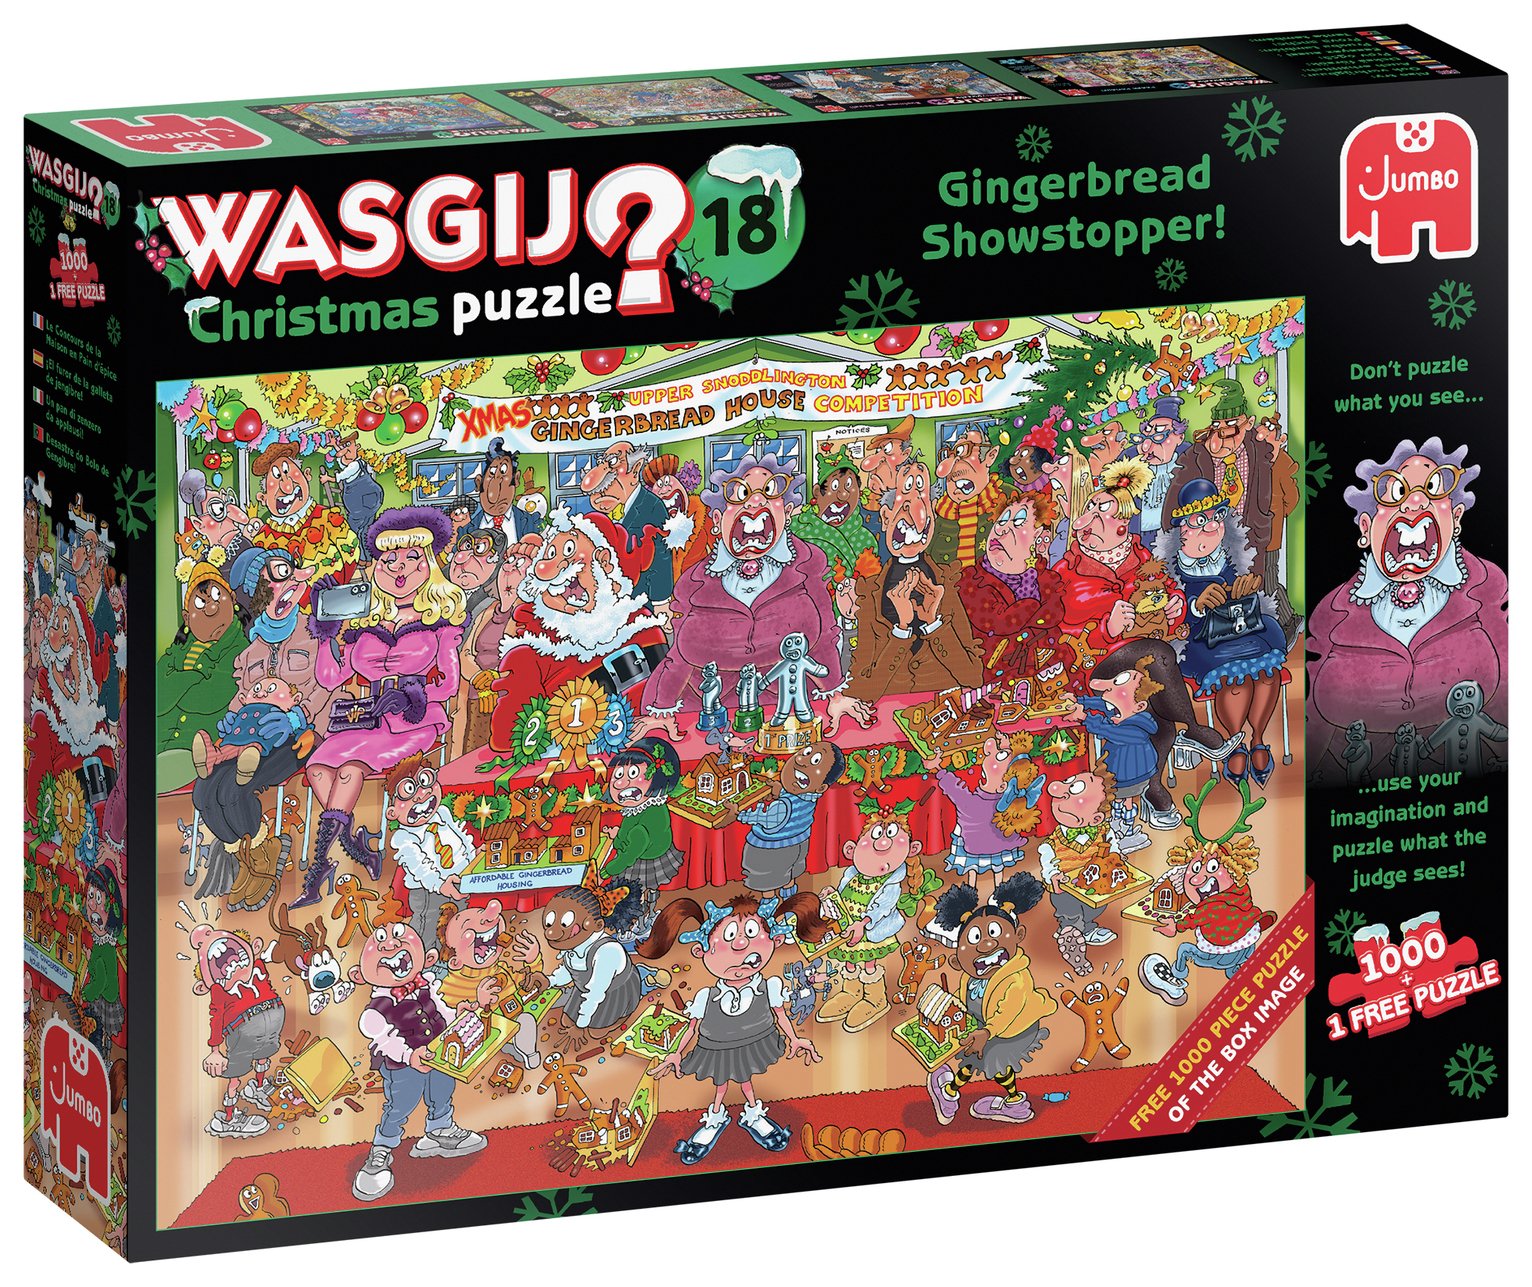 Wasgij Christmas 18 Gingerbread Showstopper Jigsaw Puzzle